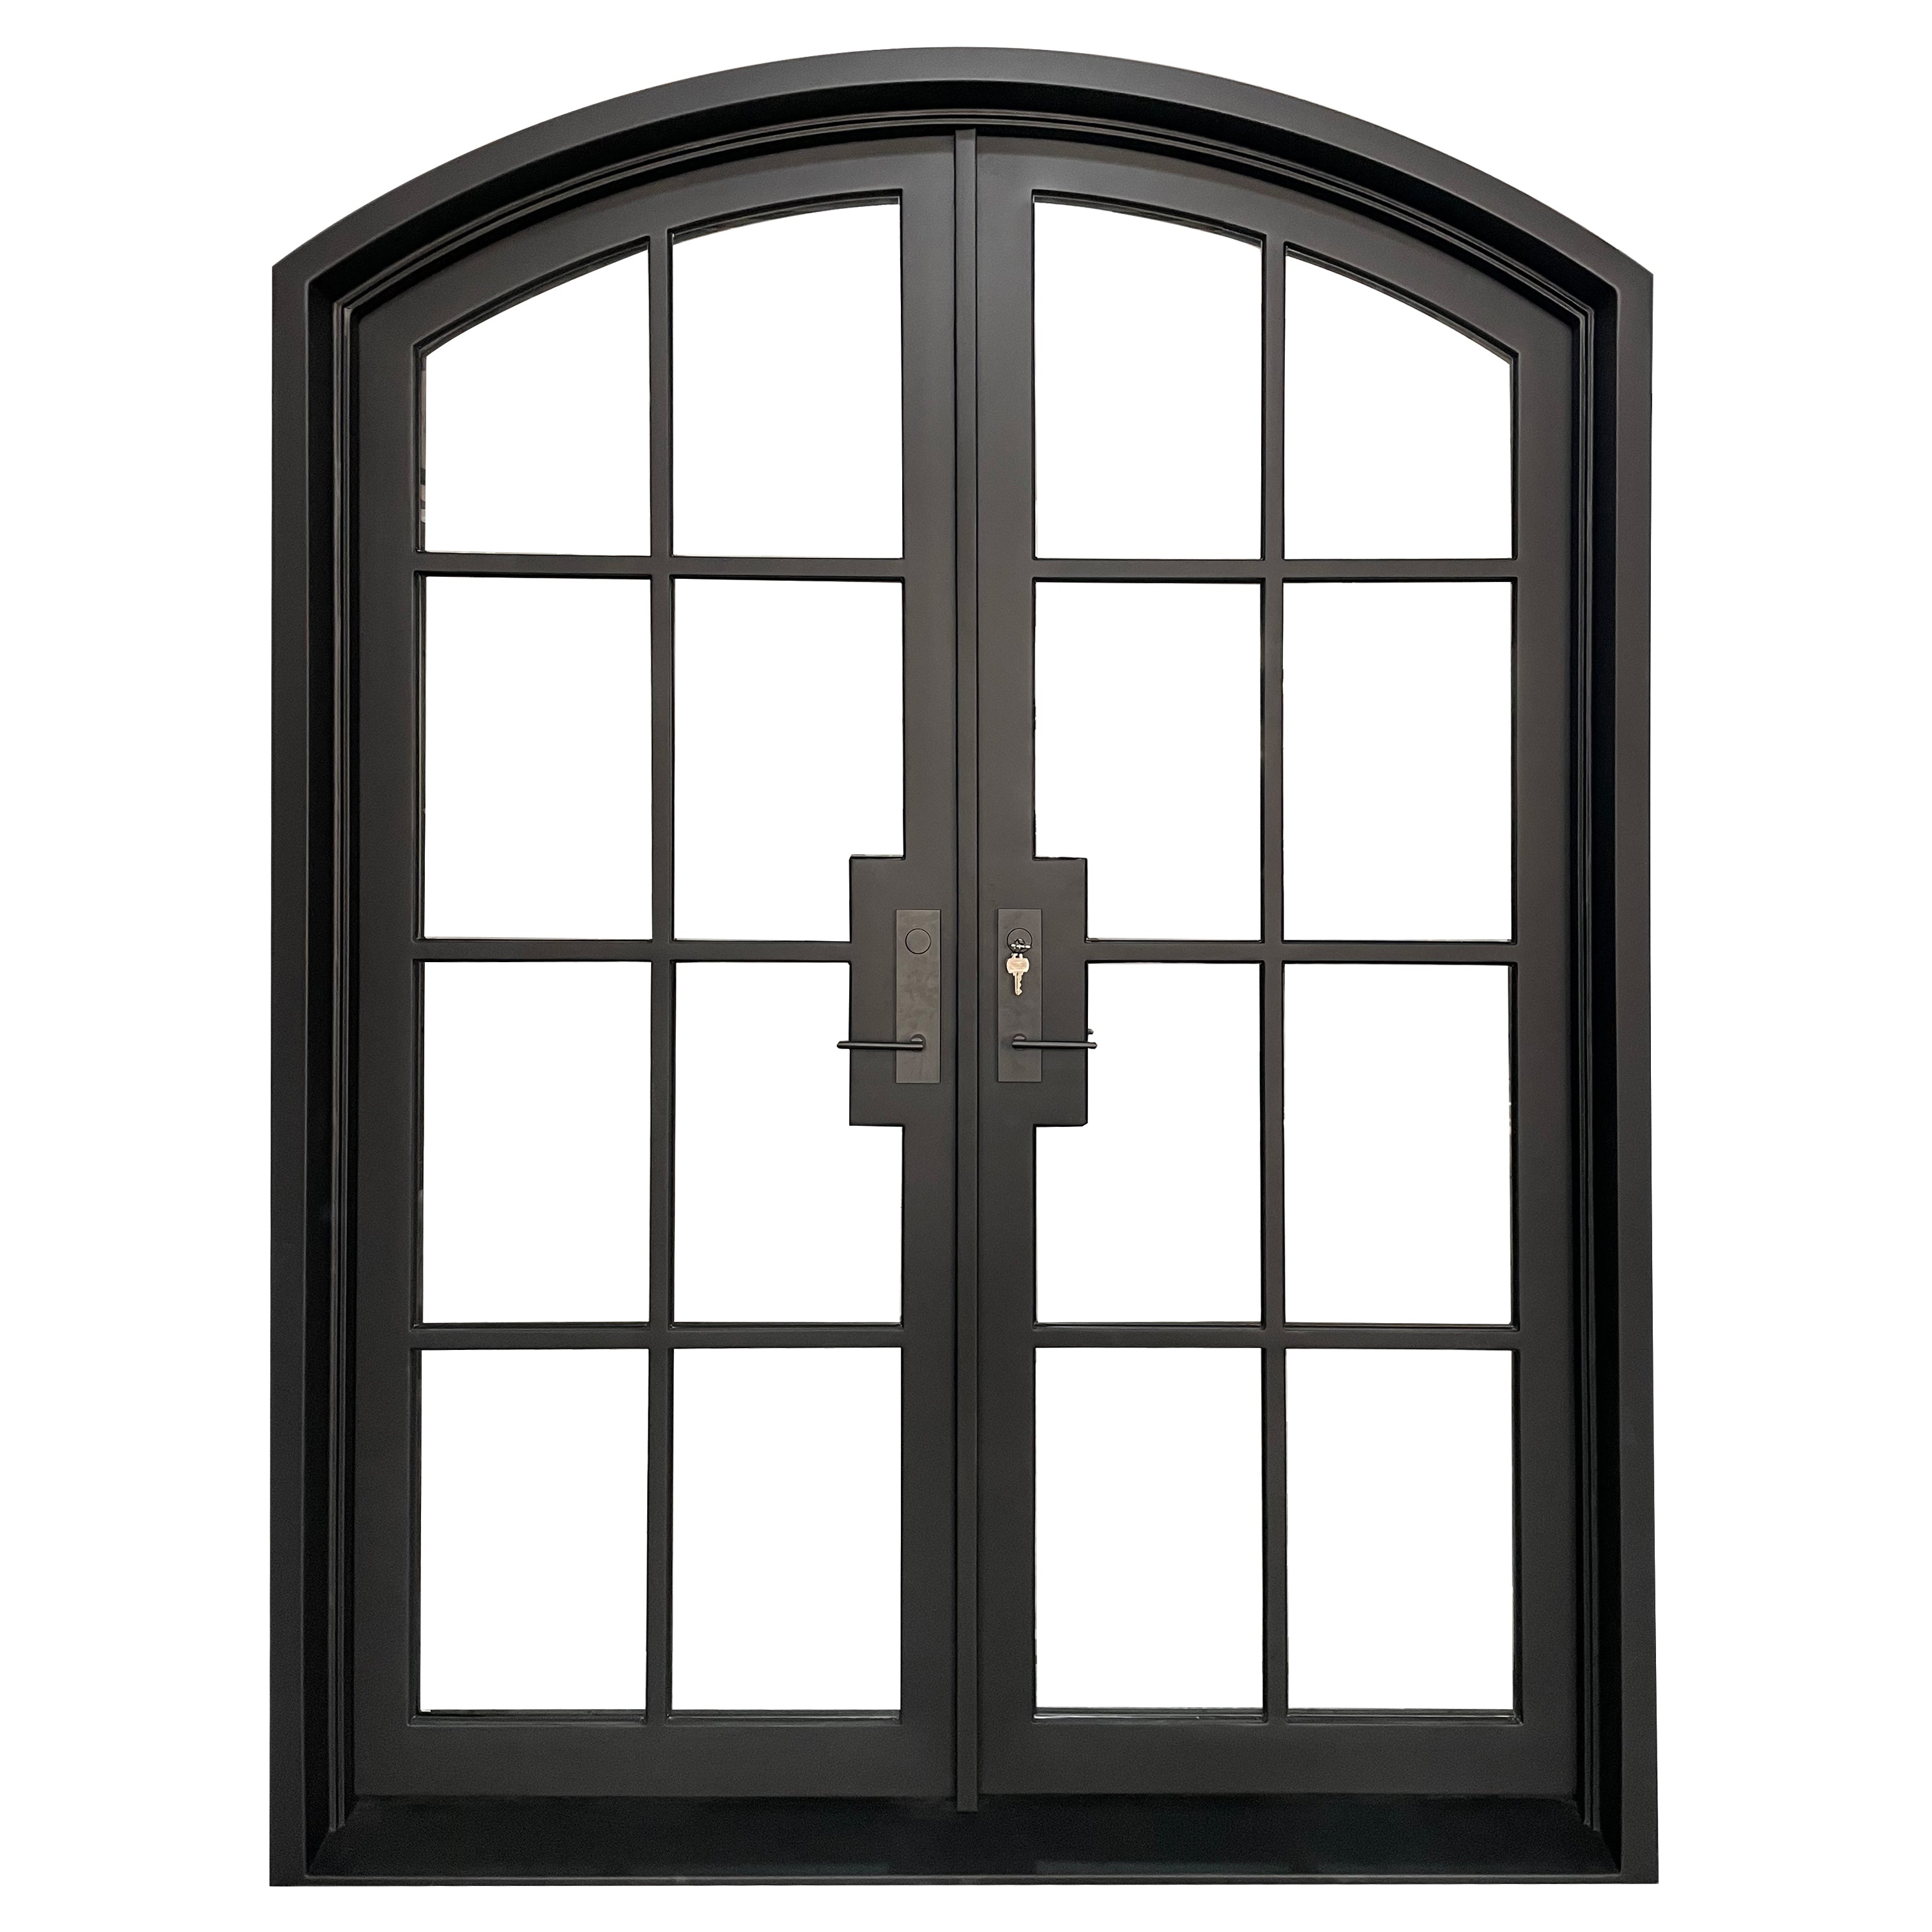 gloryirondoors neat design double french entry doors with arched top